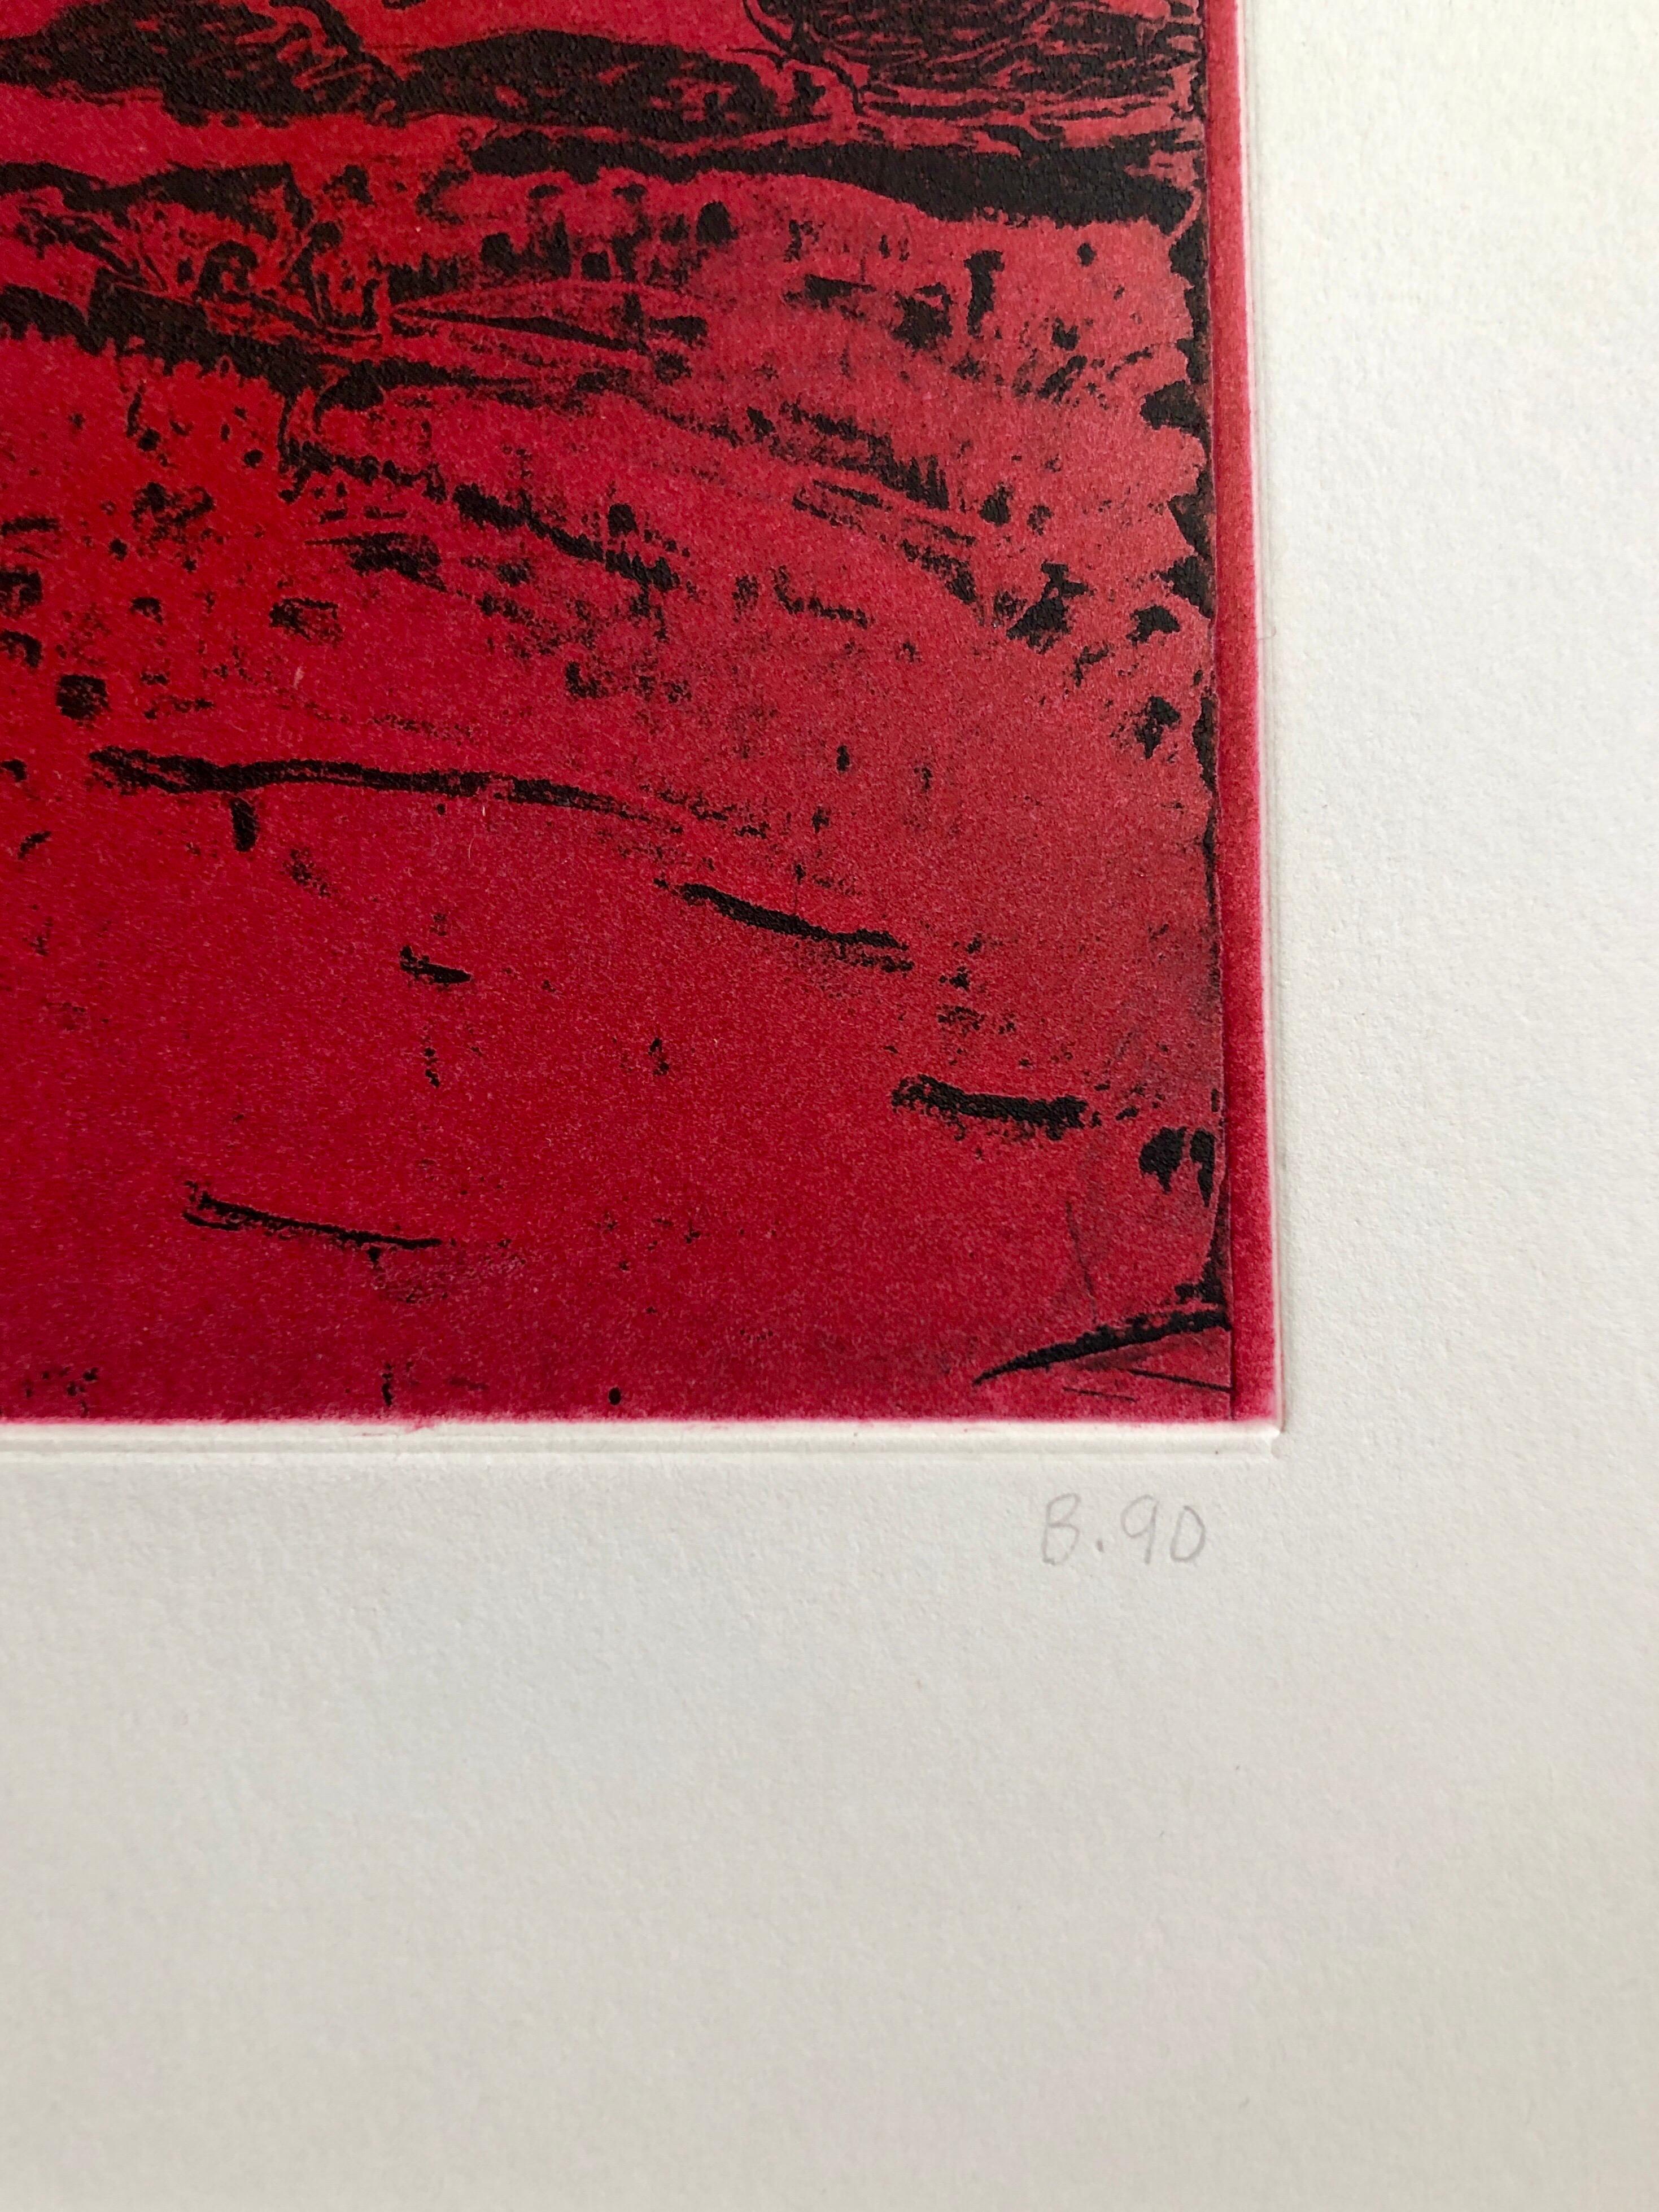 Untitled #11 Two Forms Red Ground Abstract Expressionist Aquatint Etching For Sale 6